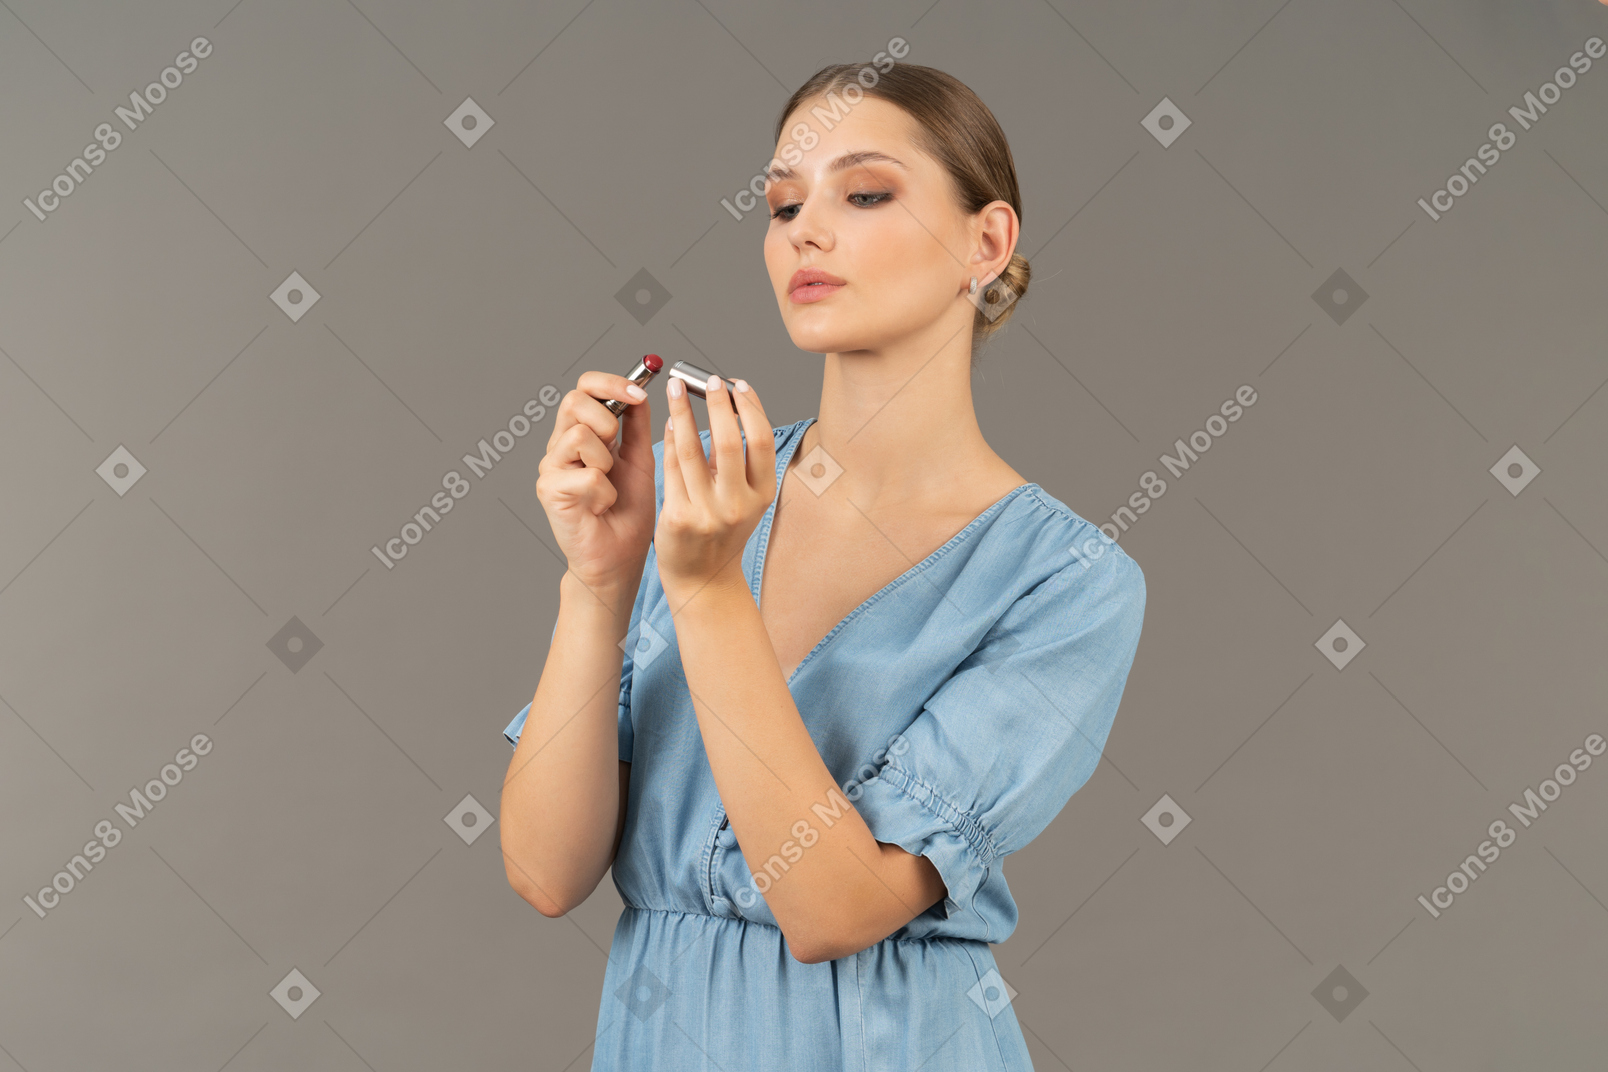 Three-quarter view of a young woman in blue dress opening lipstick